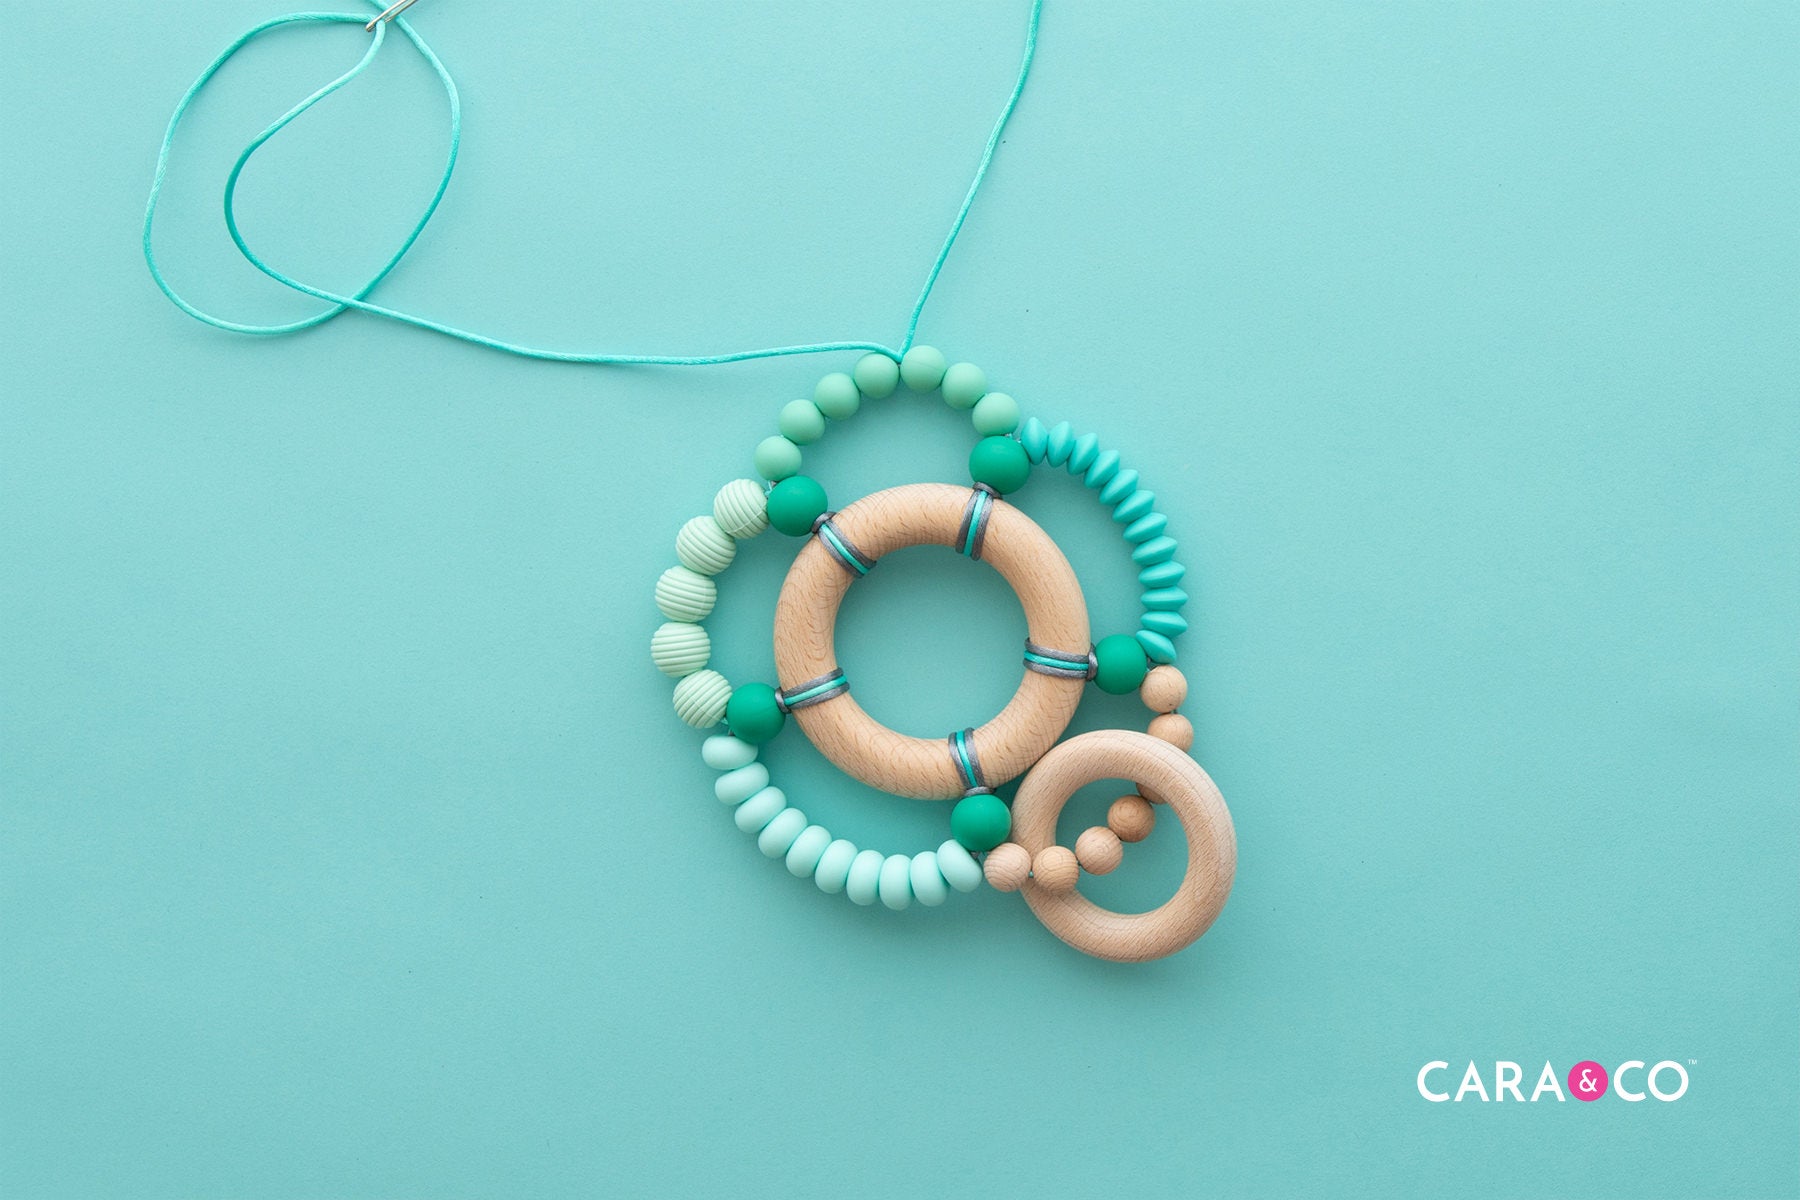 Almost Complete Teething Wheel Toy - Cara & Co